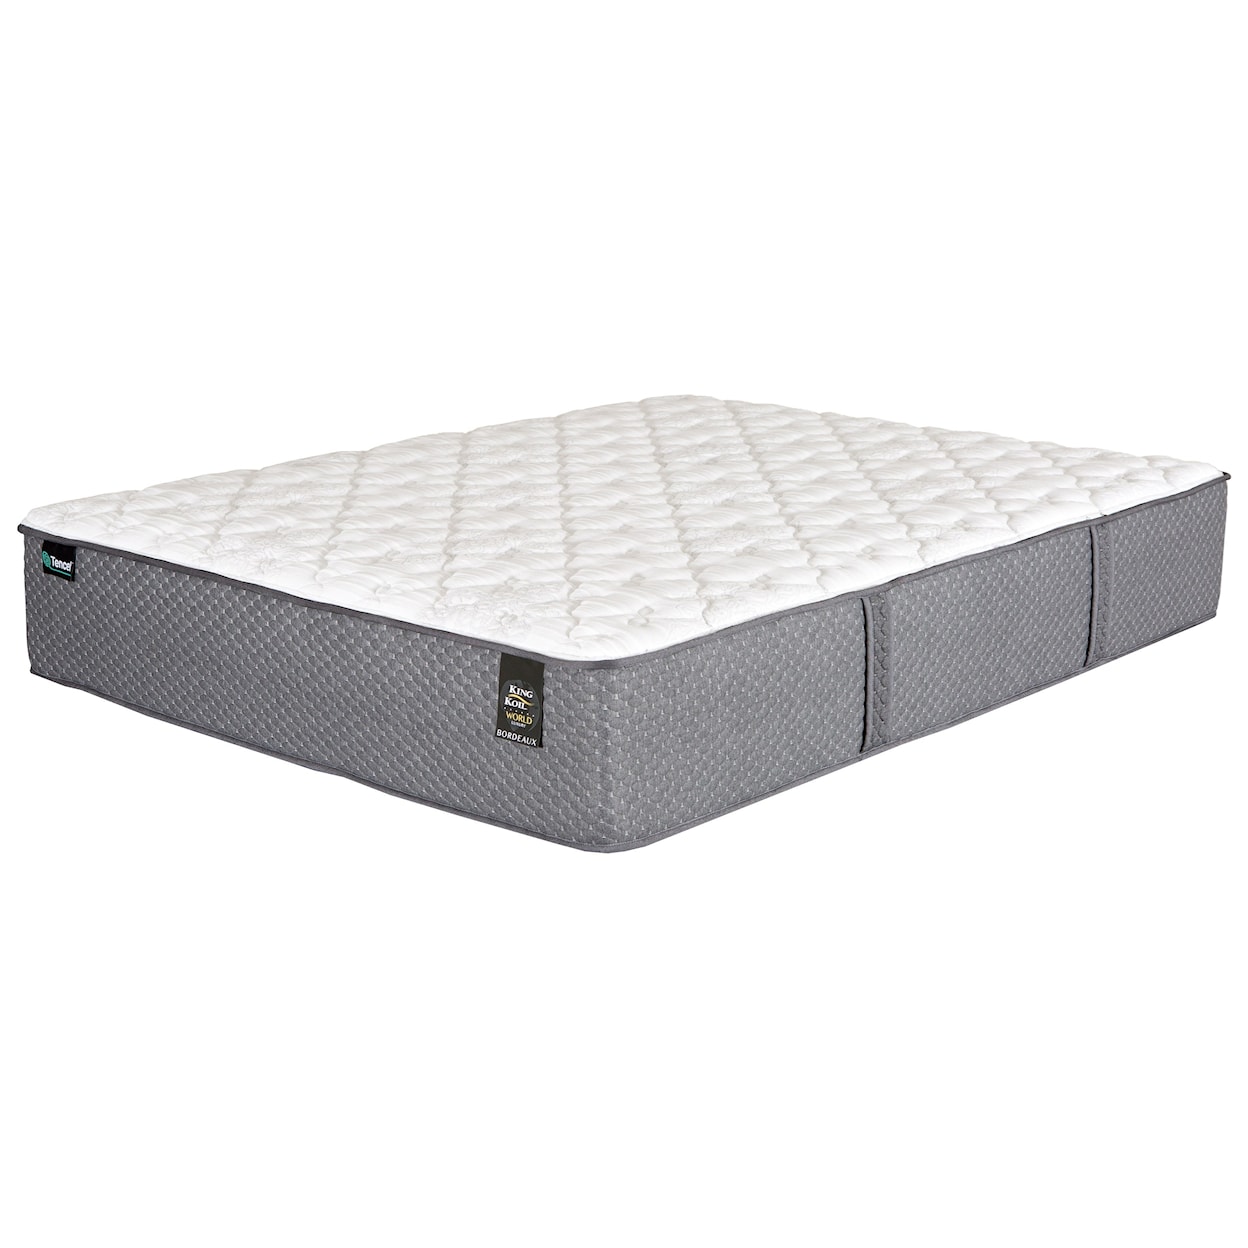 King Koil Beaumont EF Twin XL Pocketed Coil Mattress